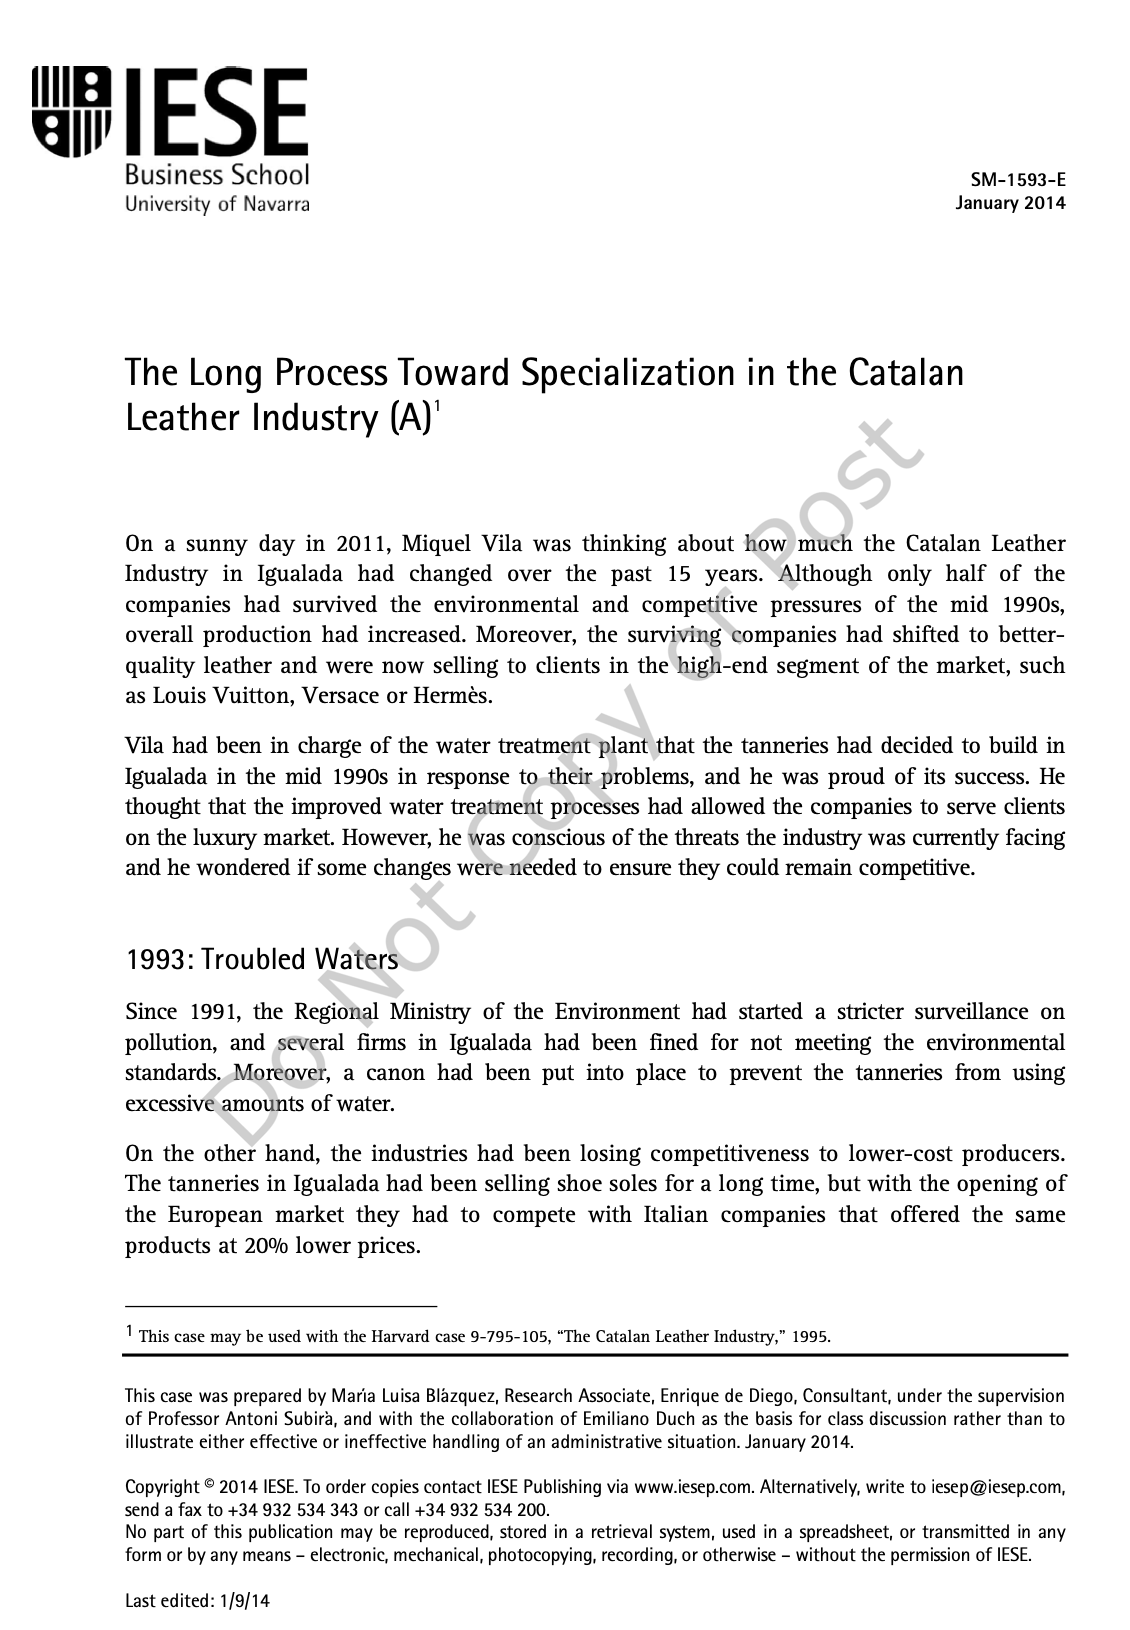 The Long Process Toward Specialization in the Catalan Leather Industry